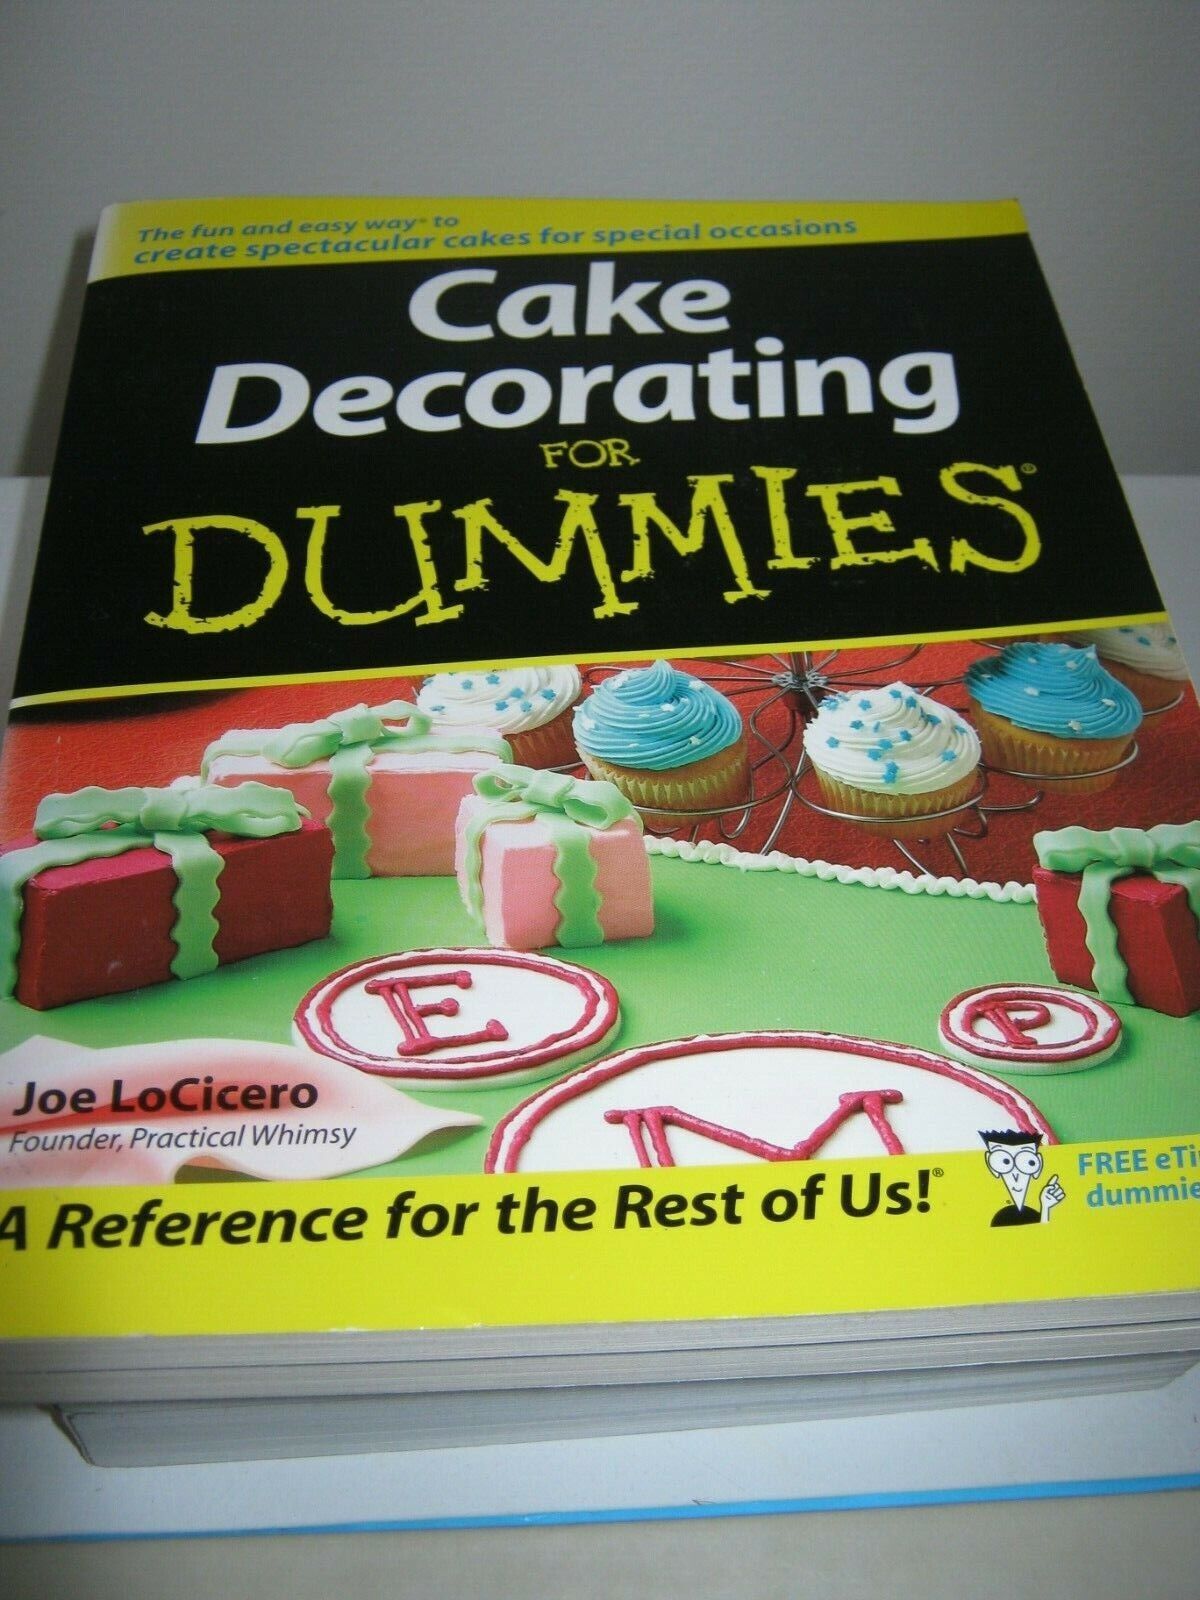 Primary image for Cake Decorating for Dummies by Joe LoCicero